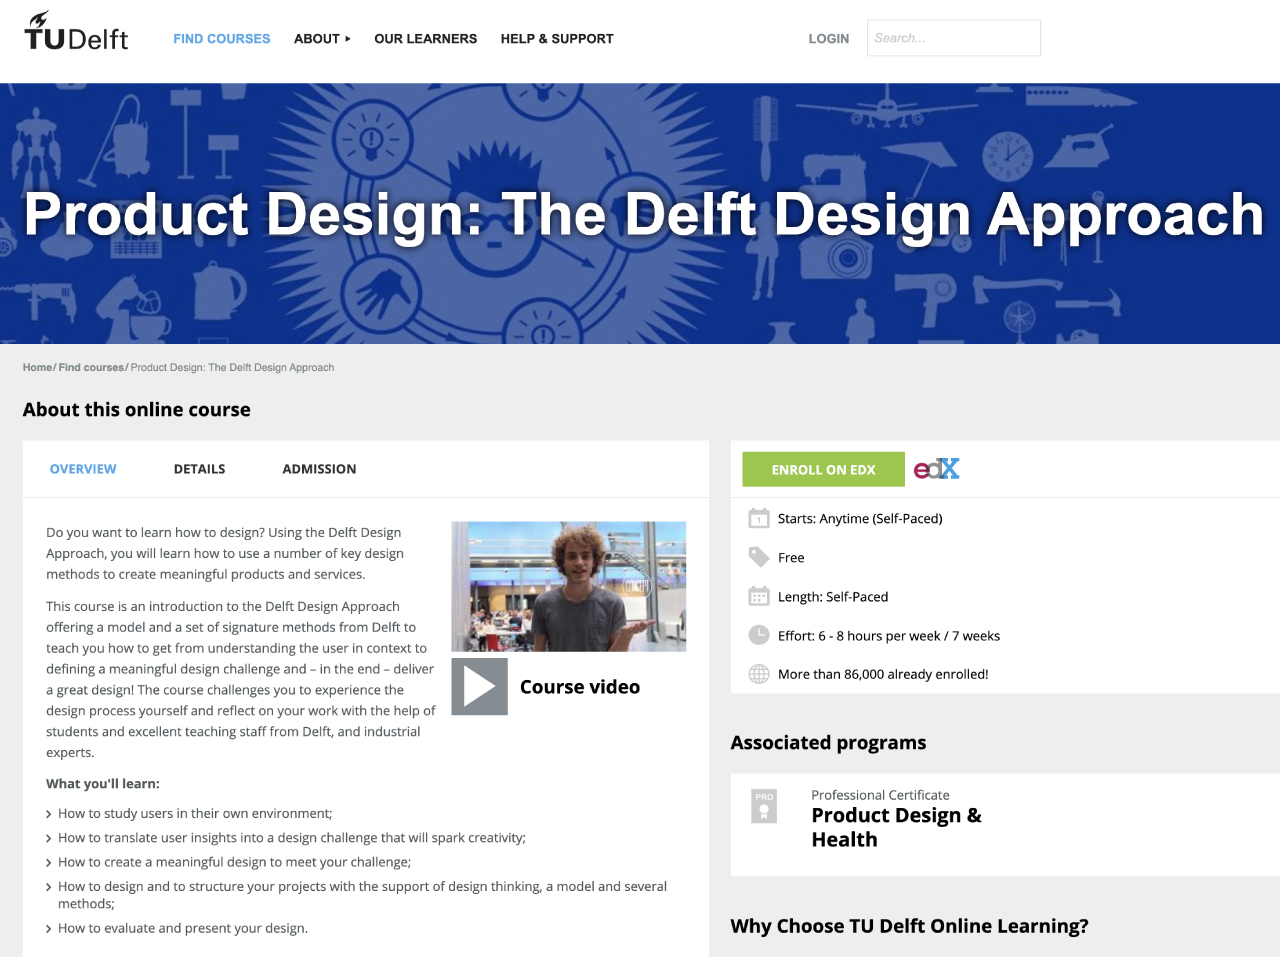 Product Design: The Delft Design Approach